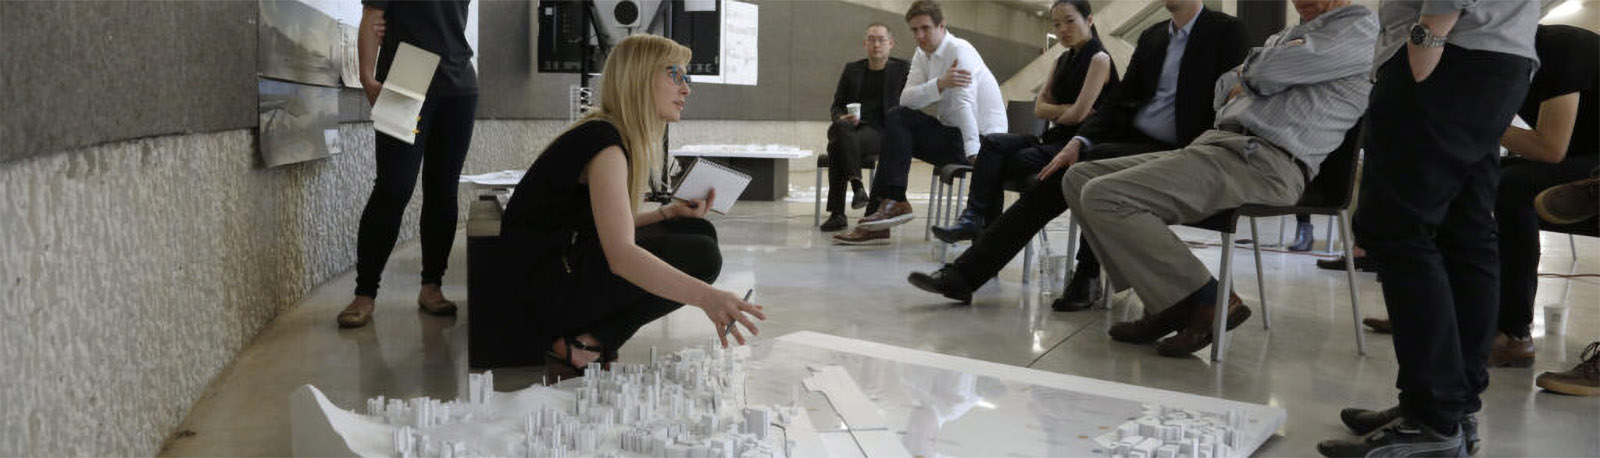 Student being down talking to forum of people in chairs presenting a white city model